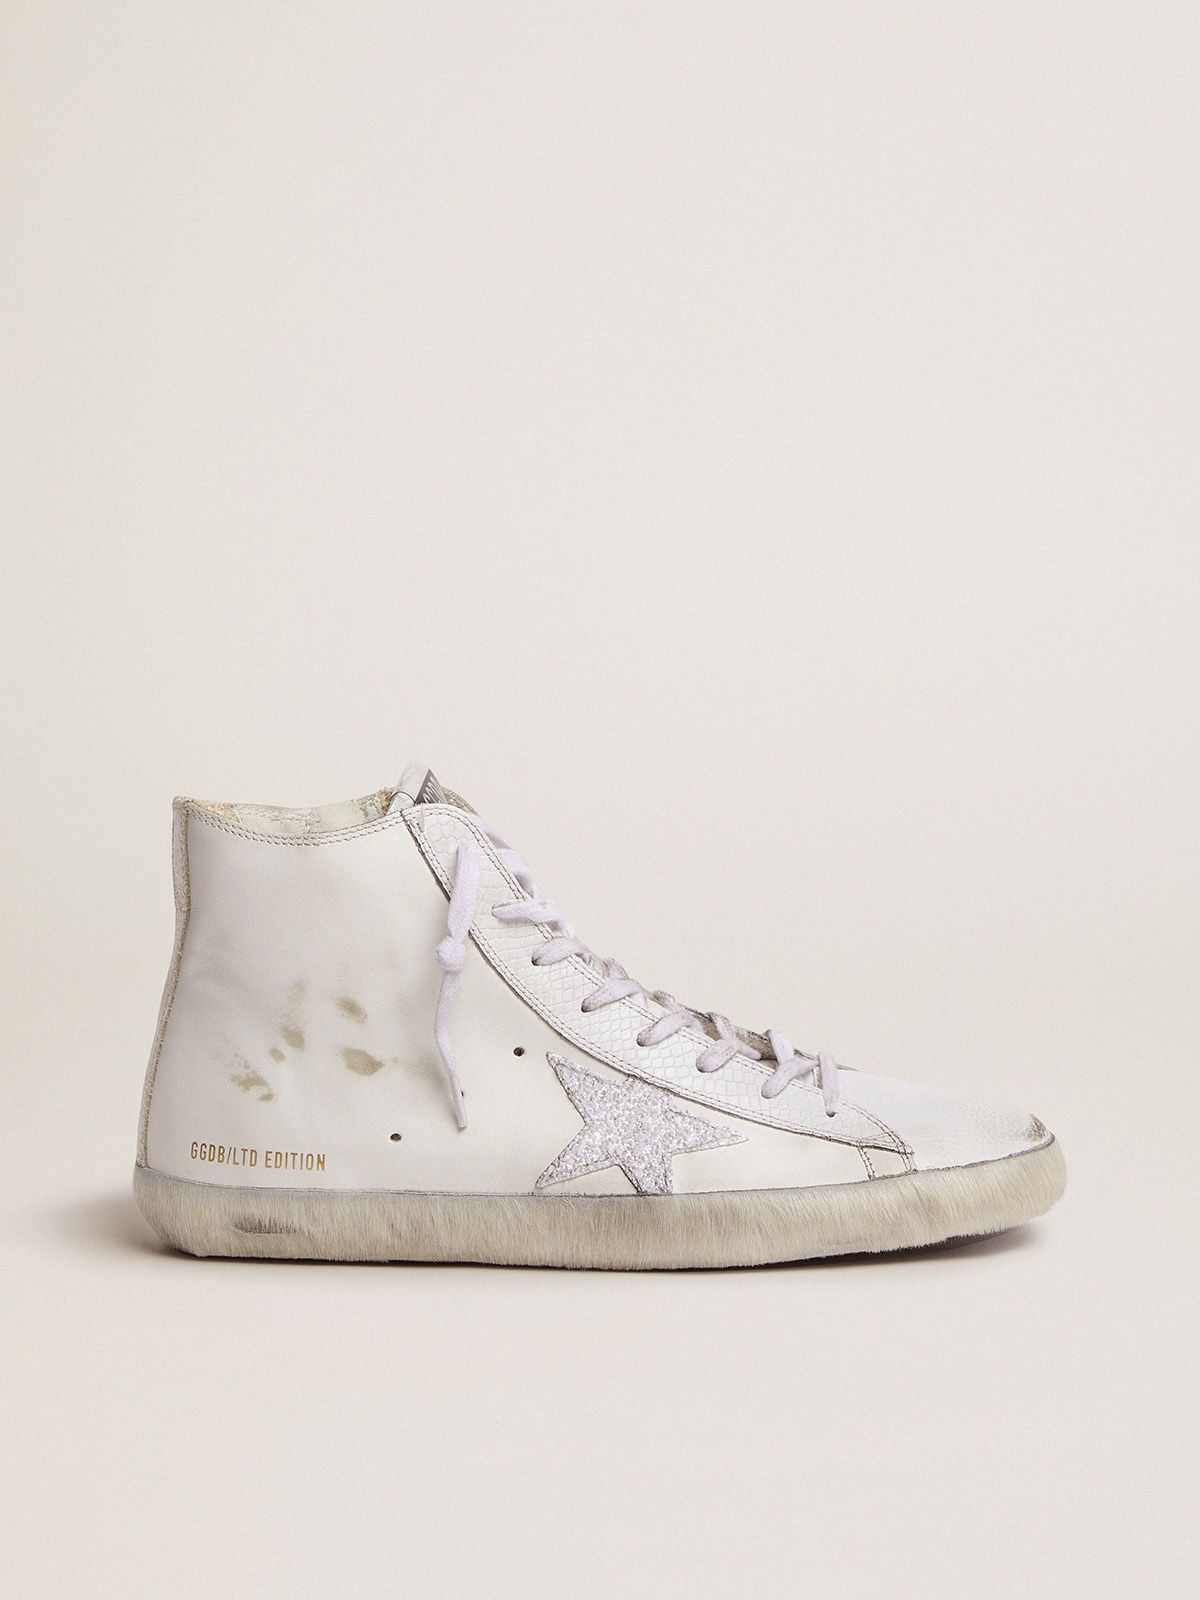 Men’s LAB Limited Edition white and glitter Francy sneakers | 